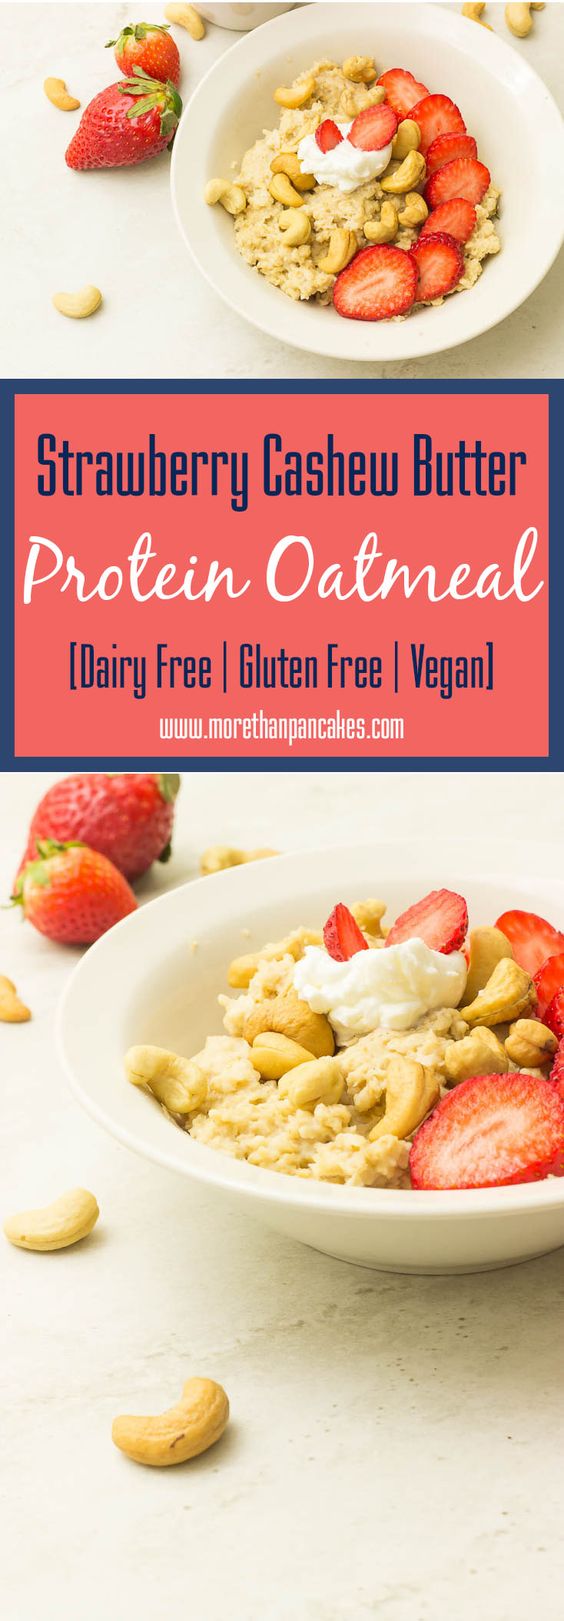 If you love greens for breakfast, then this is the perfect dish for you. It contains high-protein sorghum and vitamin-packed greens for a healthy and satisfying start to your day. 55. Strawberry Cashew Butter Protein Oatmeal